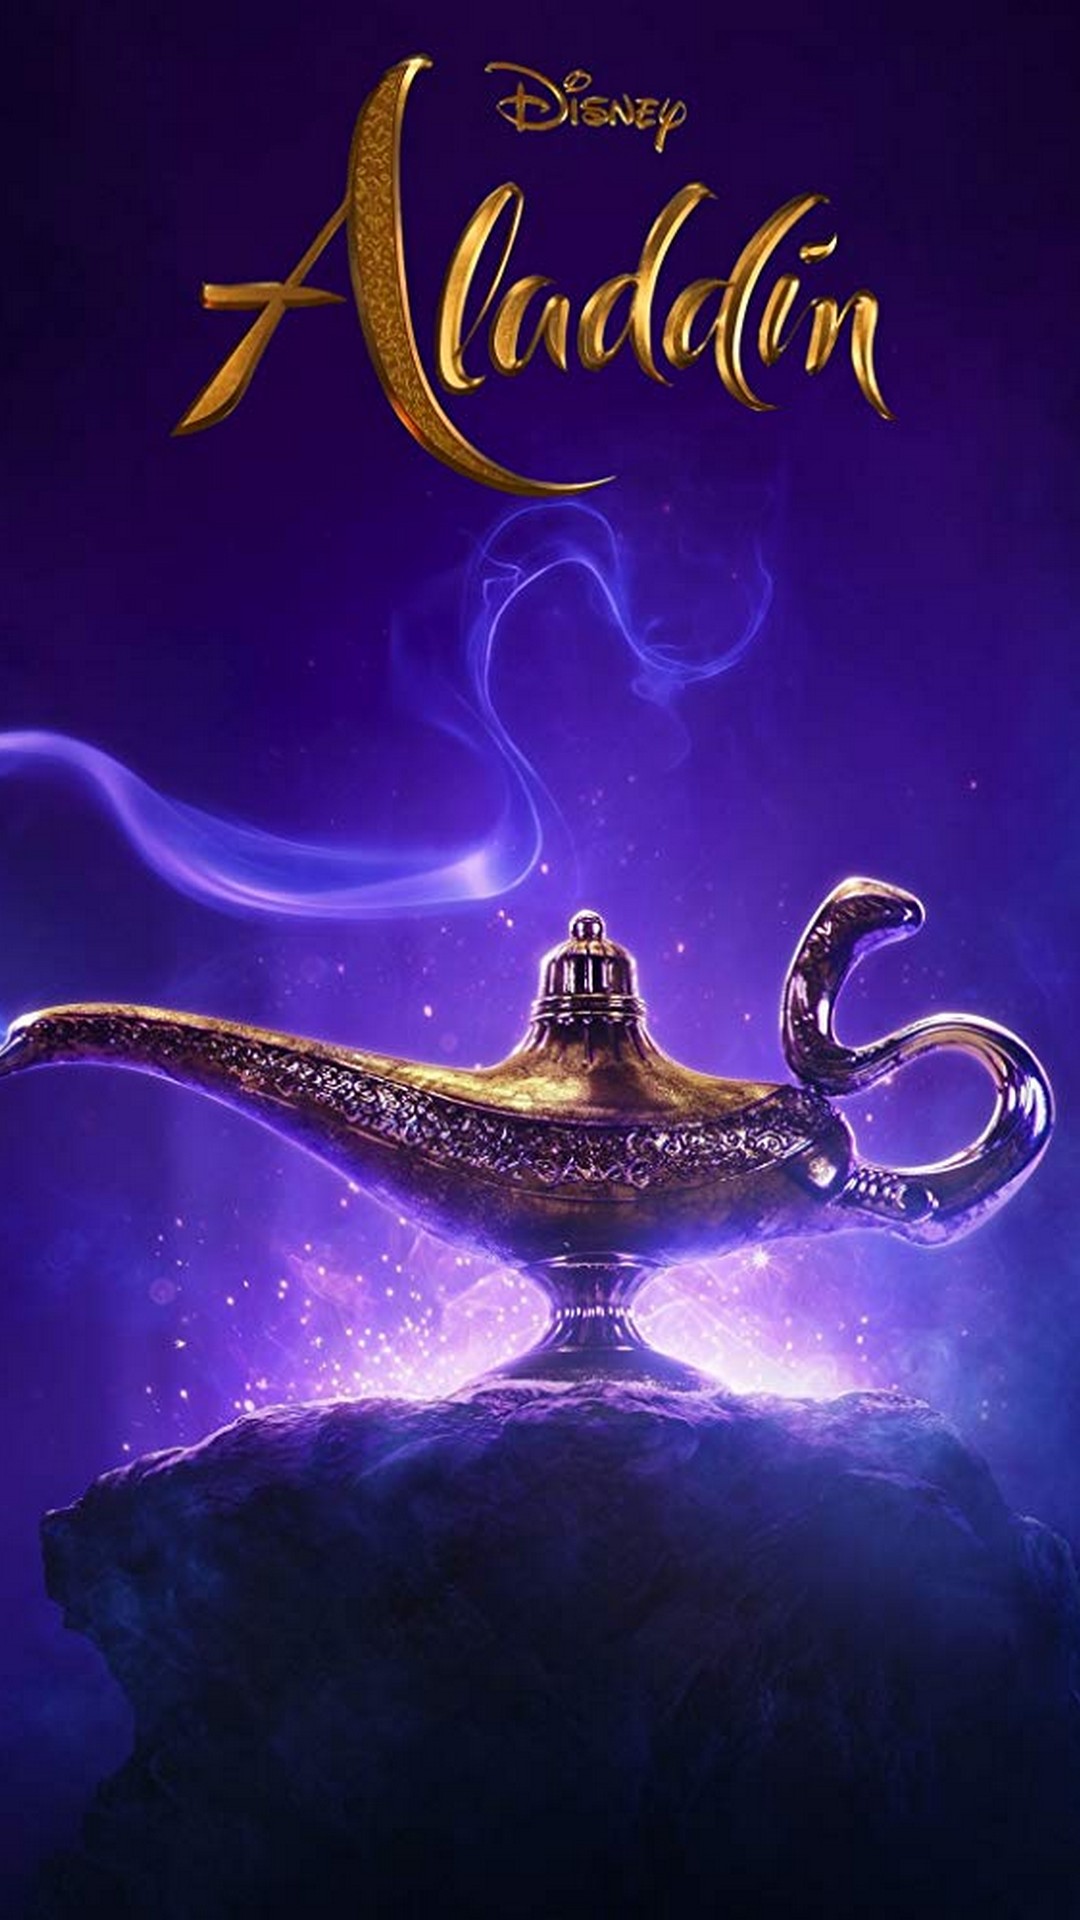 Aladdin iPhone Wallpaper With high-resolution 1080X1920 pixel. You can use this wallpaper for your iPhone 5, 6, 7, 8, X, XS, XR backgrounds, Mobile Screensaver, or iPad Lock Screen